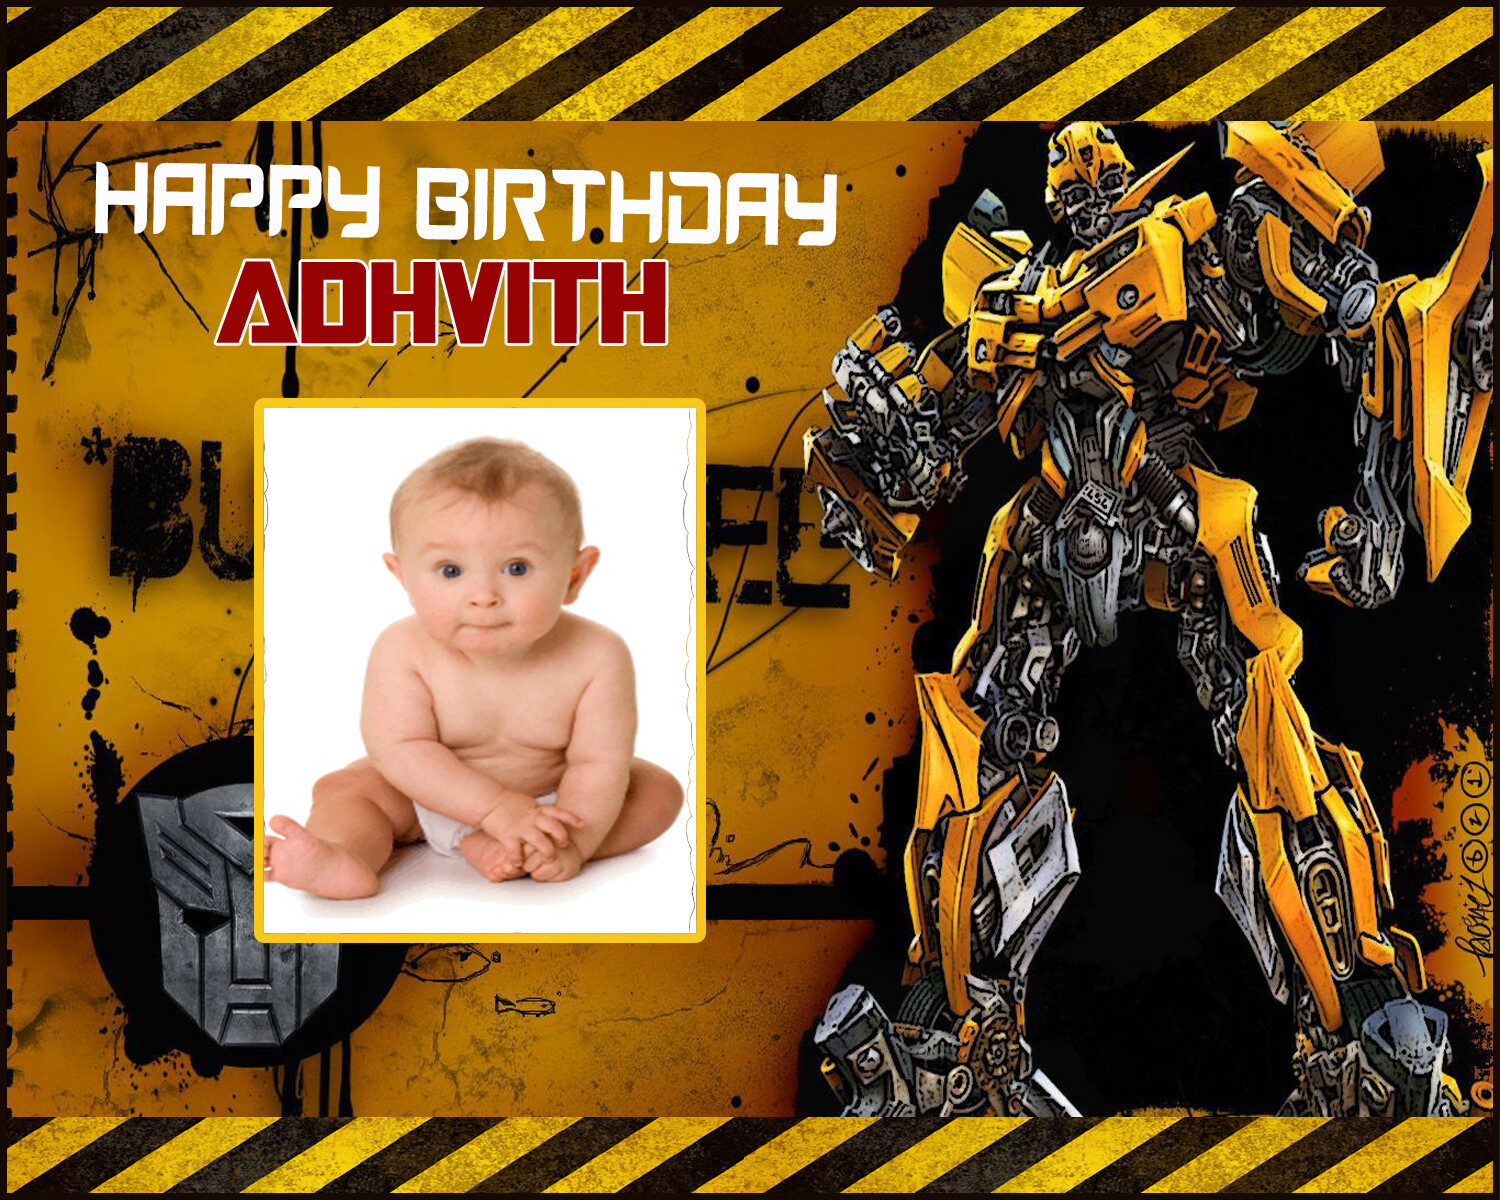 Transformer Bumblebee Backdrop / Background Banner With Baby Picture  (4ft x 5ft)